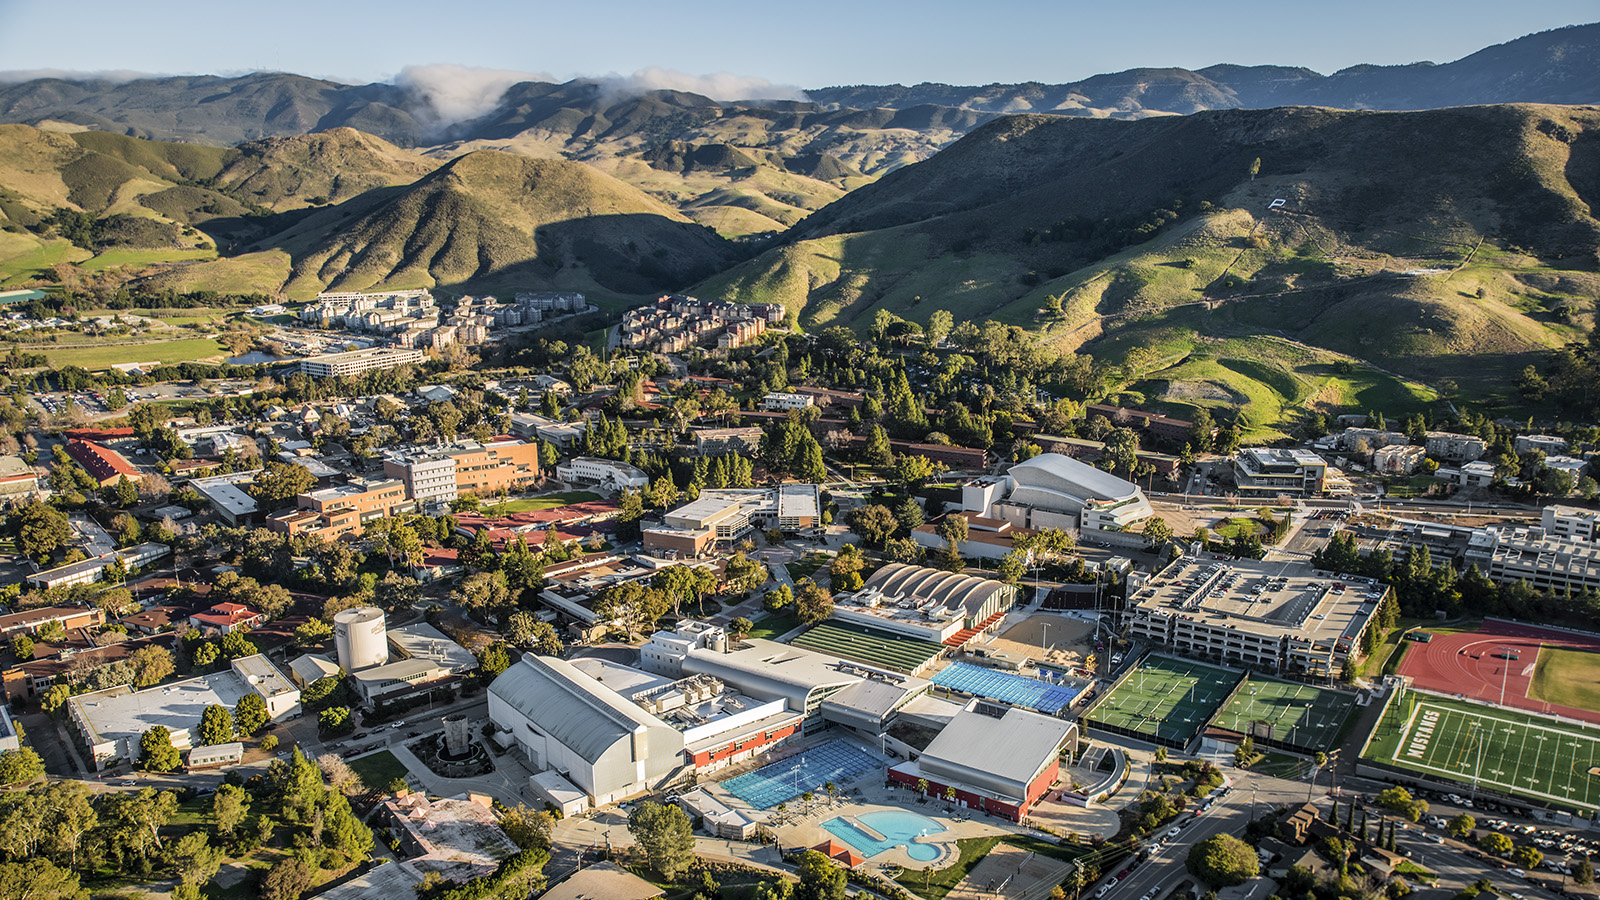 About Cal Poly